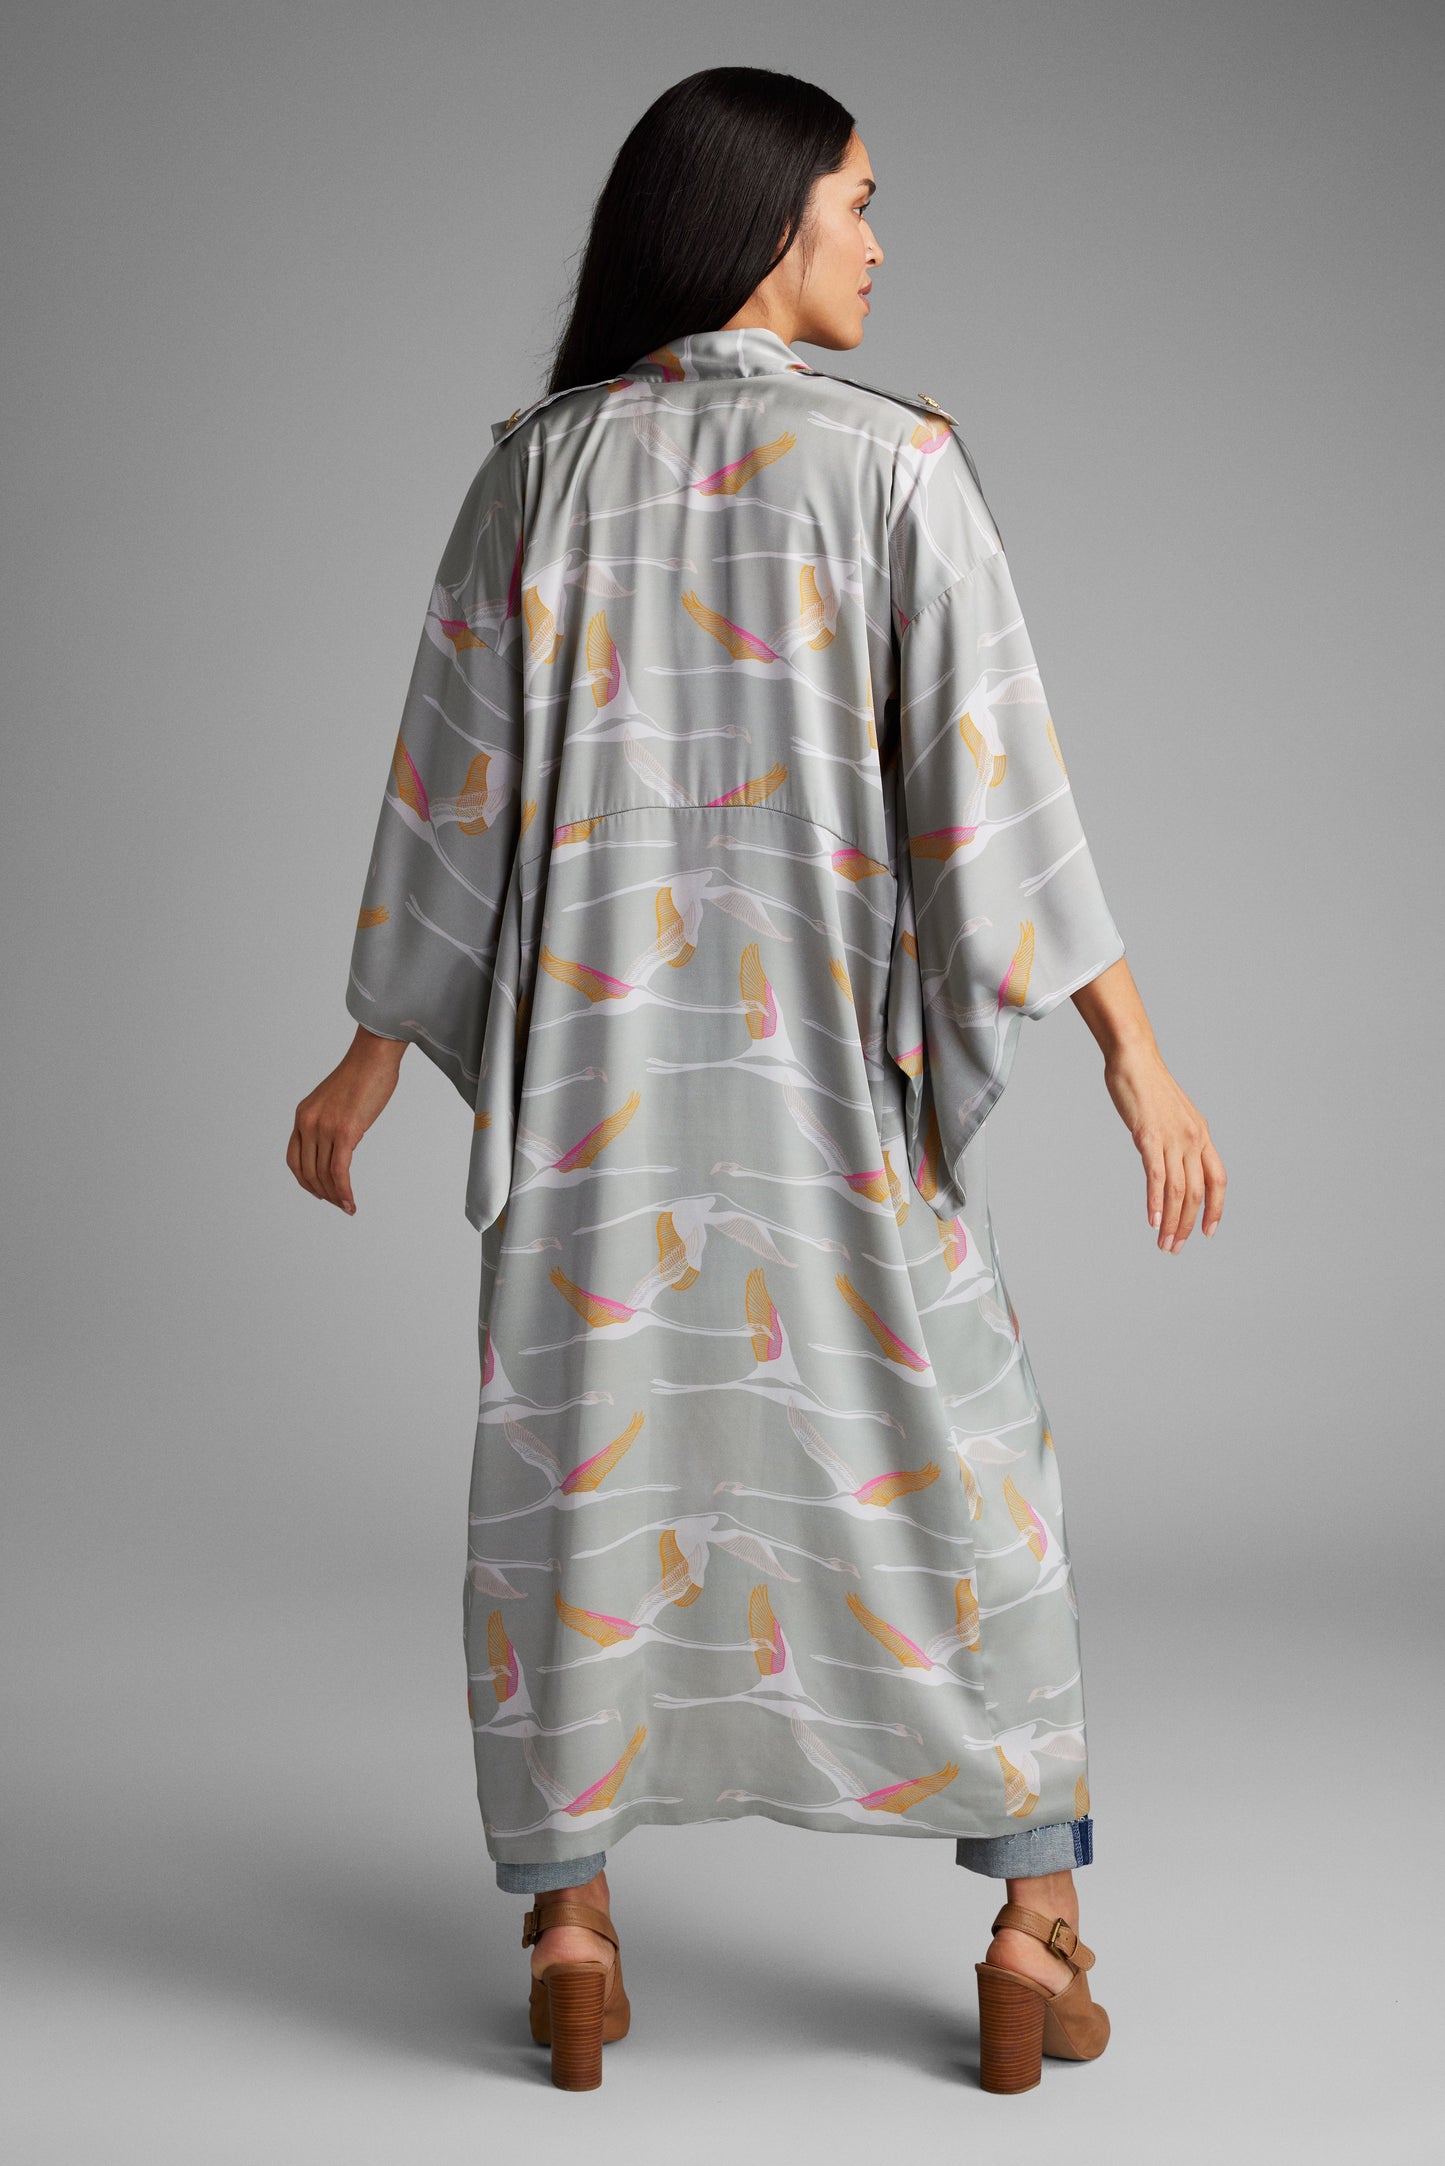 back view of woman standing with hands on her face wearing a grey and pink colored crane patterned kimono duster made from recycled materials